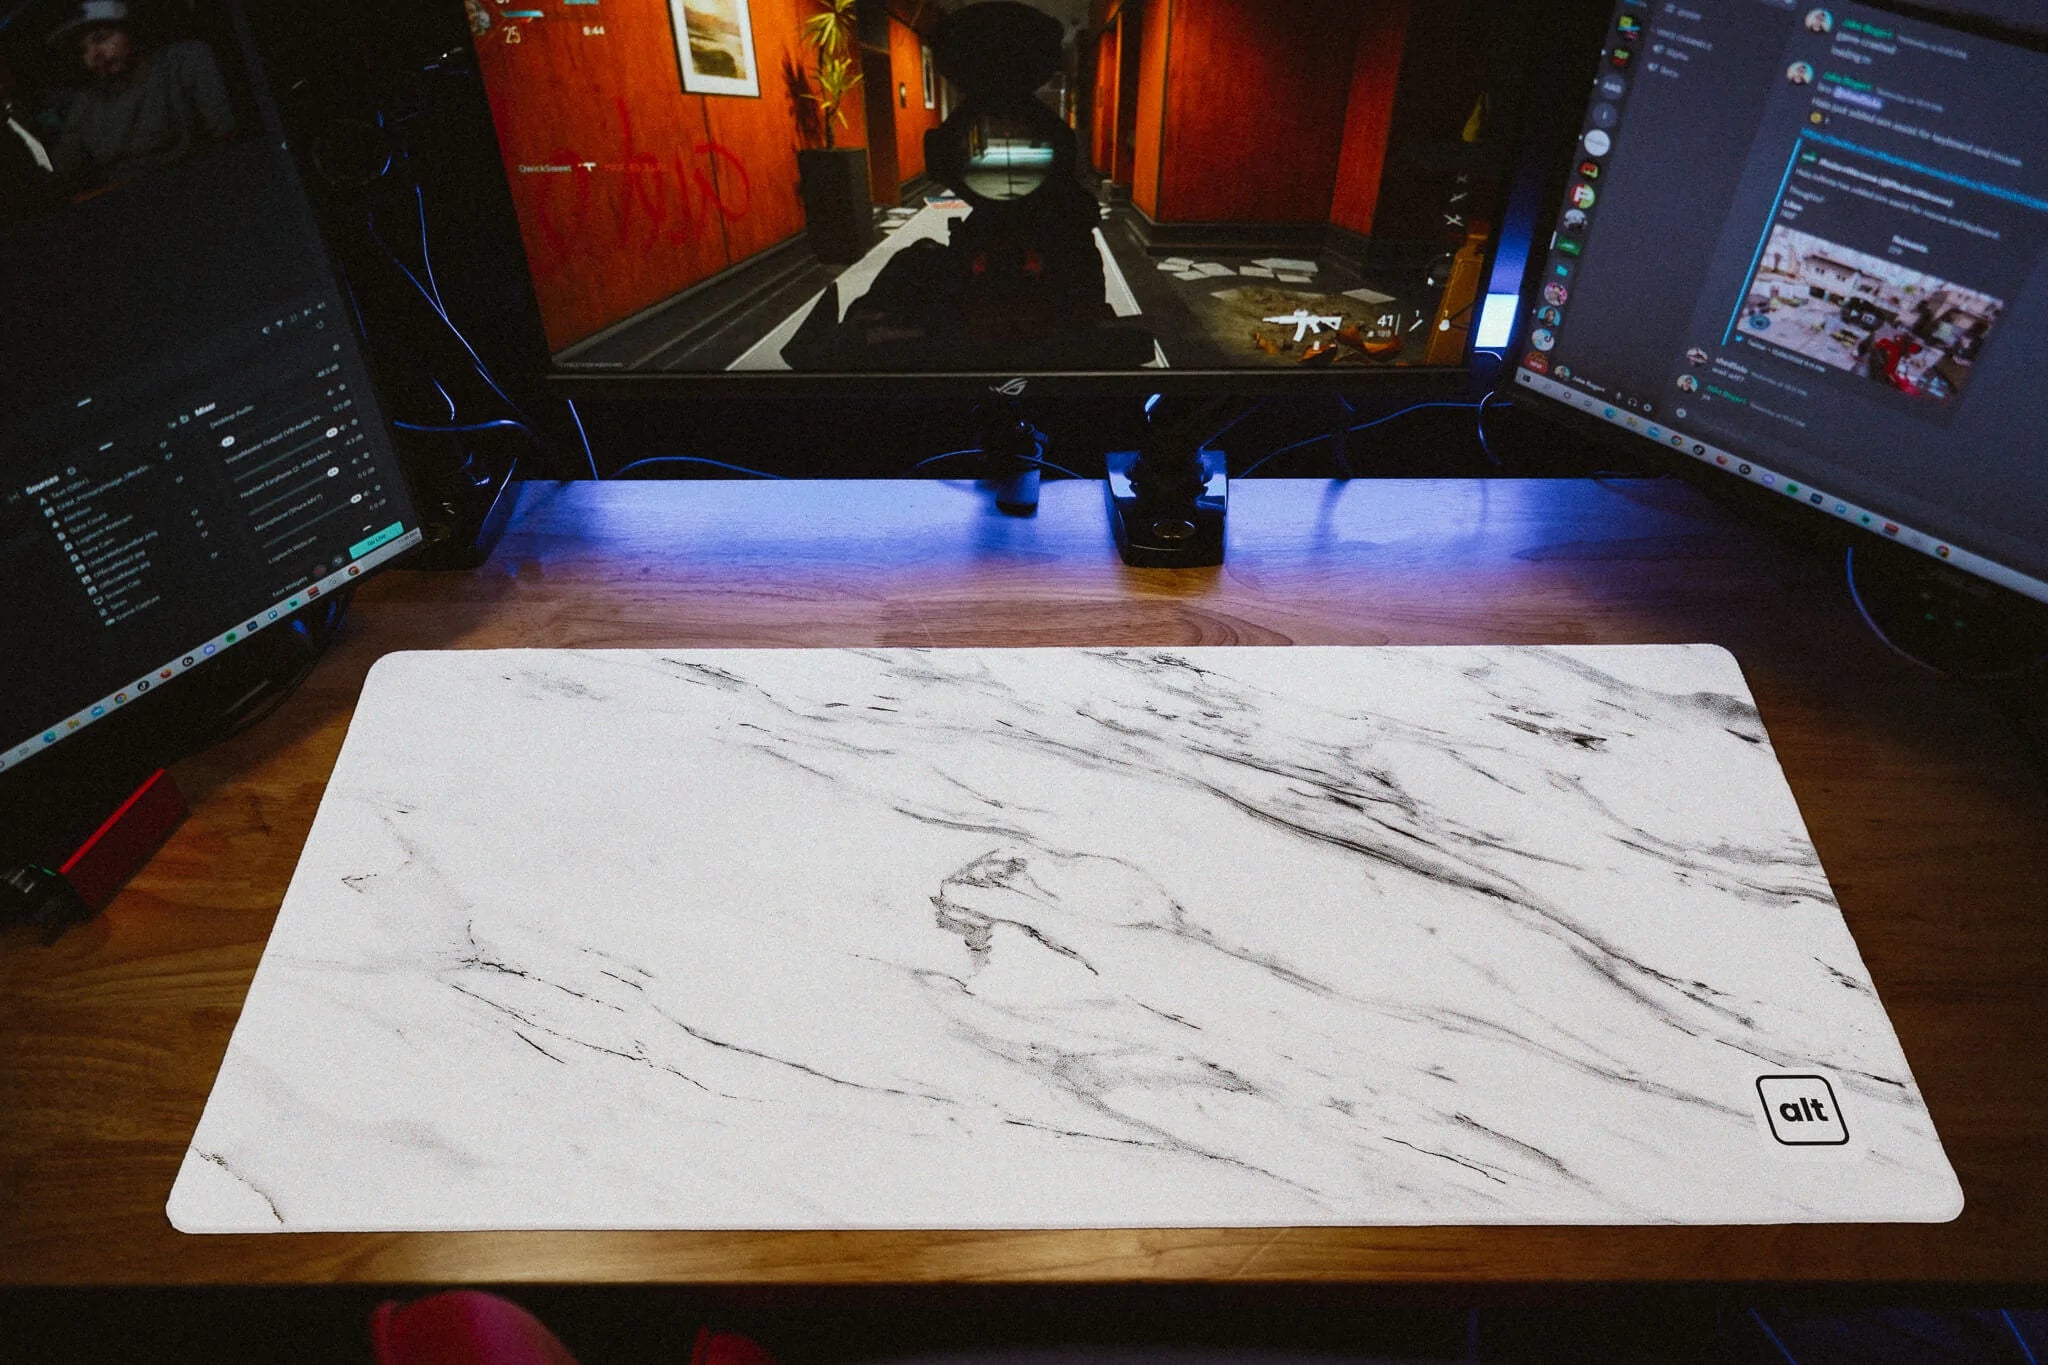 White Marble Mousepad - Cinch Gaming